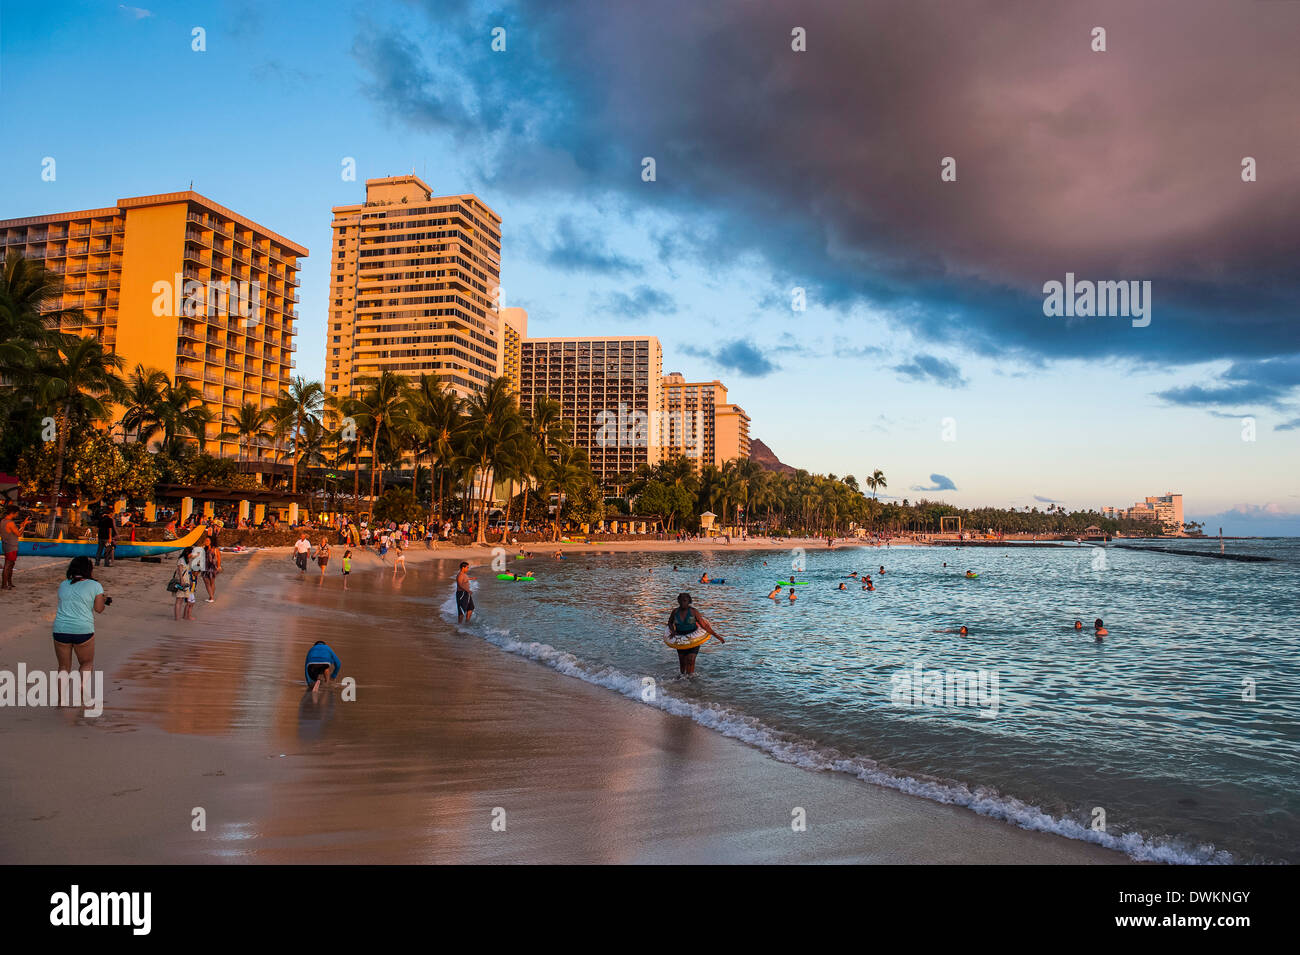 Late afternoon sun over the hotels on Waikiki Beach, Oahu, Hawaii, United States of America, Pacific Stock Photo